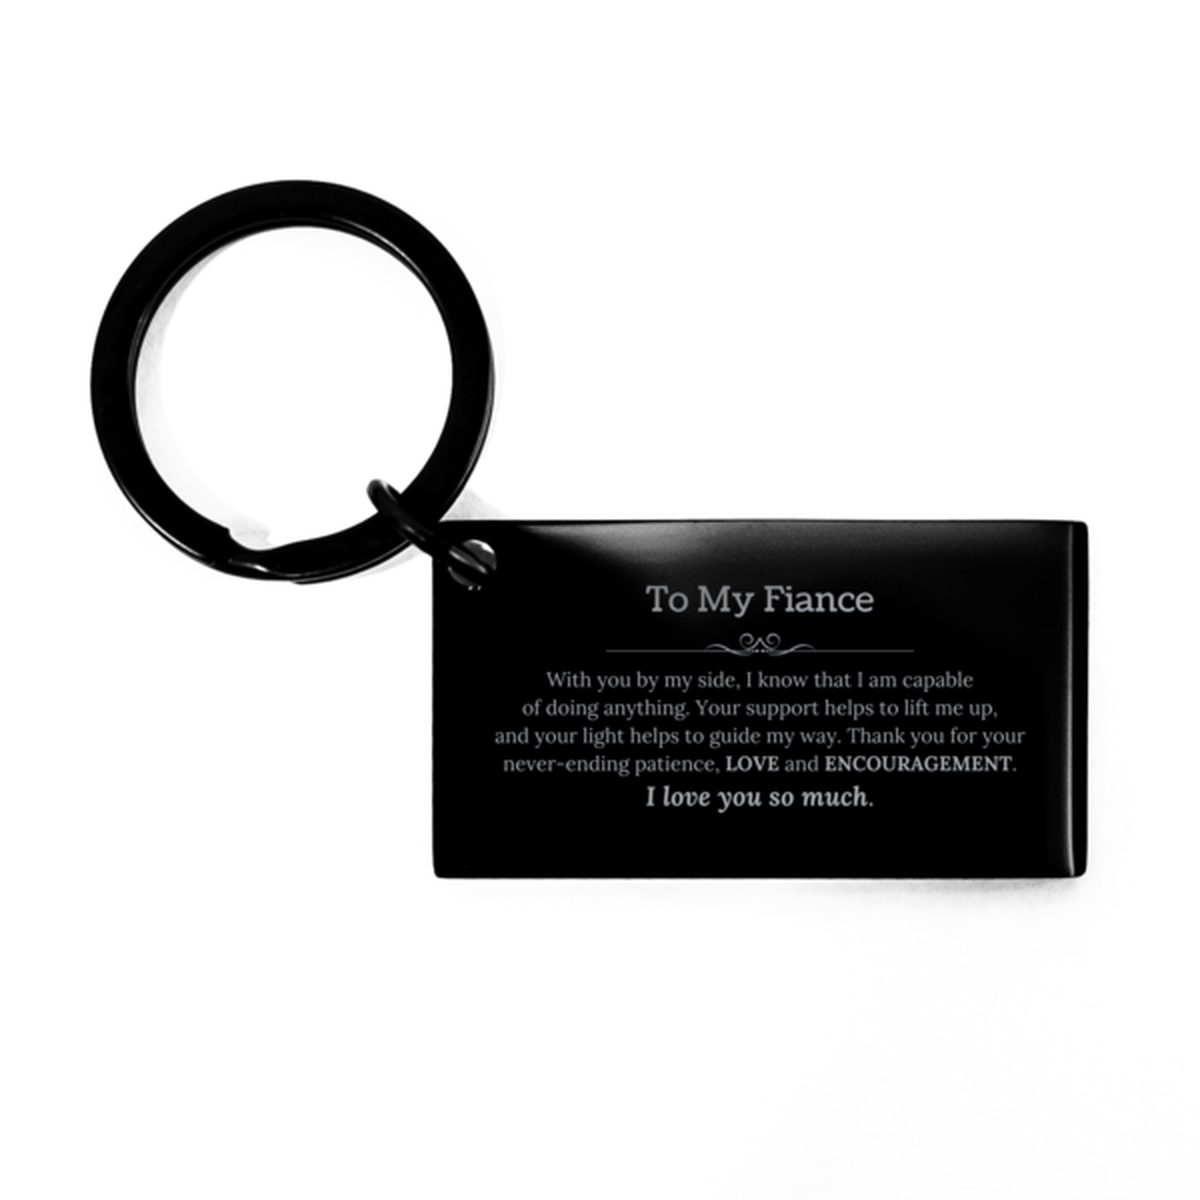 Appreciation Fiance Keychain Gifts, To My Fiance Birthday Christmas Wedding Keepsake Gifts for Fiance With you by my side, I know that I am capable of doing anything. I love you so much